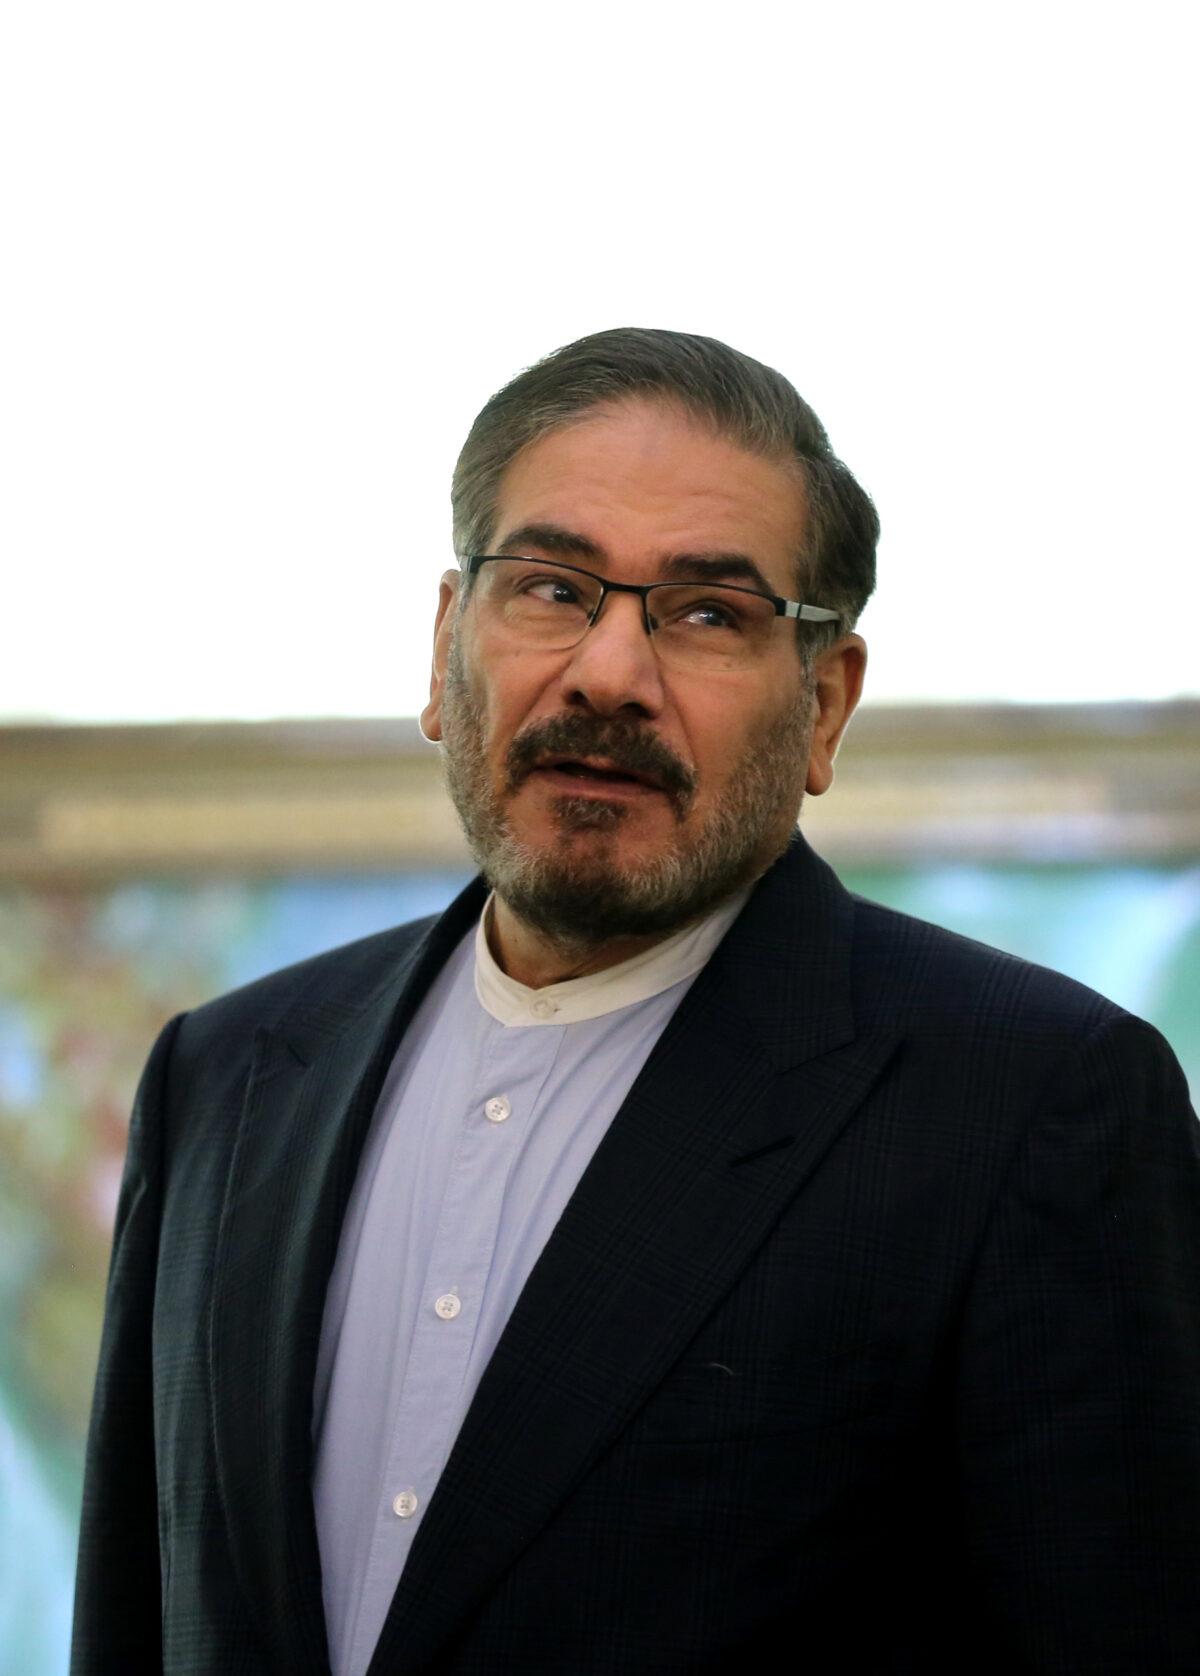 Ali Shamkhani, the secretary of the Supreme National Security Council of Iran attends a meeting with the diplomatic adviser to the French president, in Tehran, Iran, on July 10, 2019. (Atta Kenare/AFP via Getty Images)